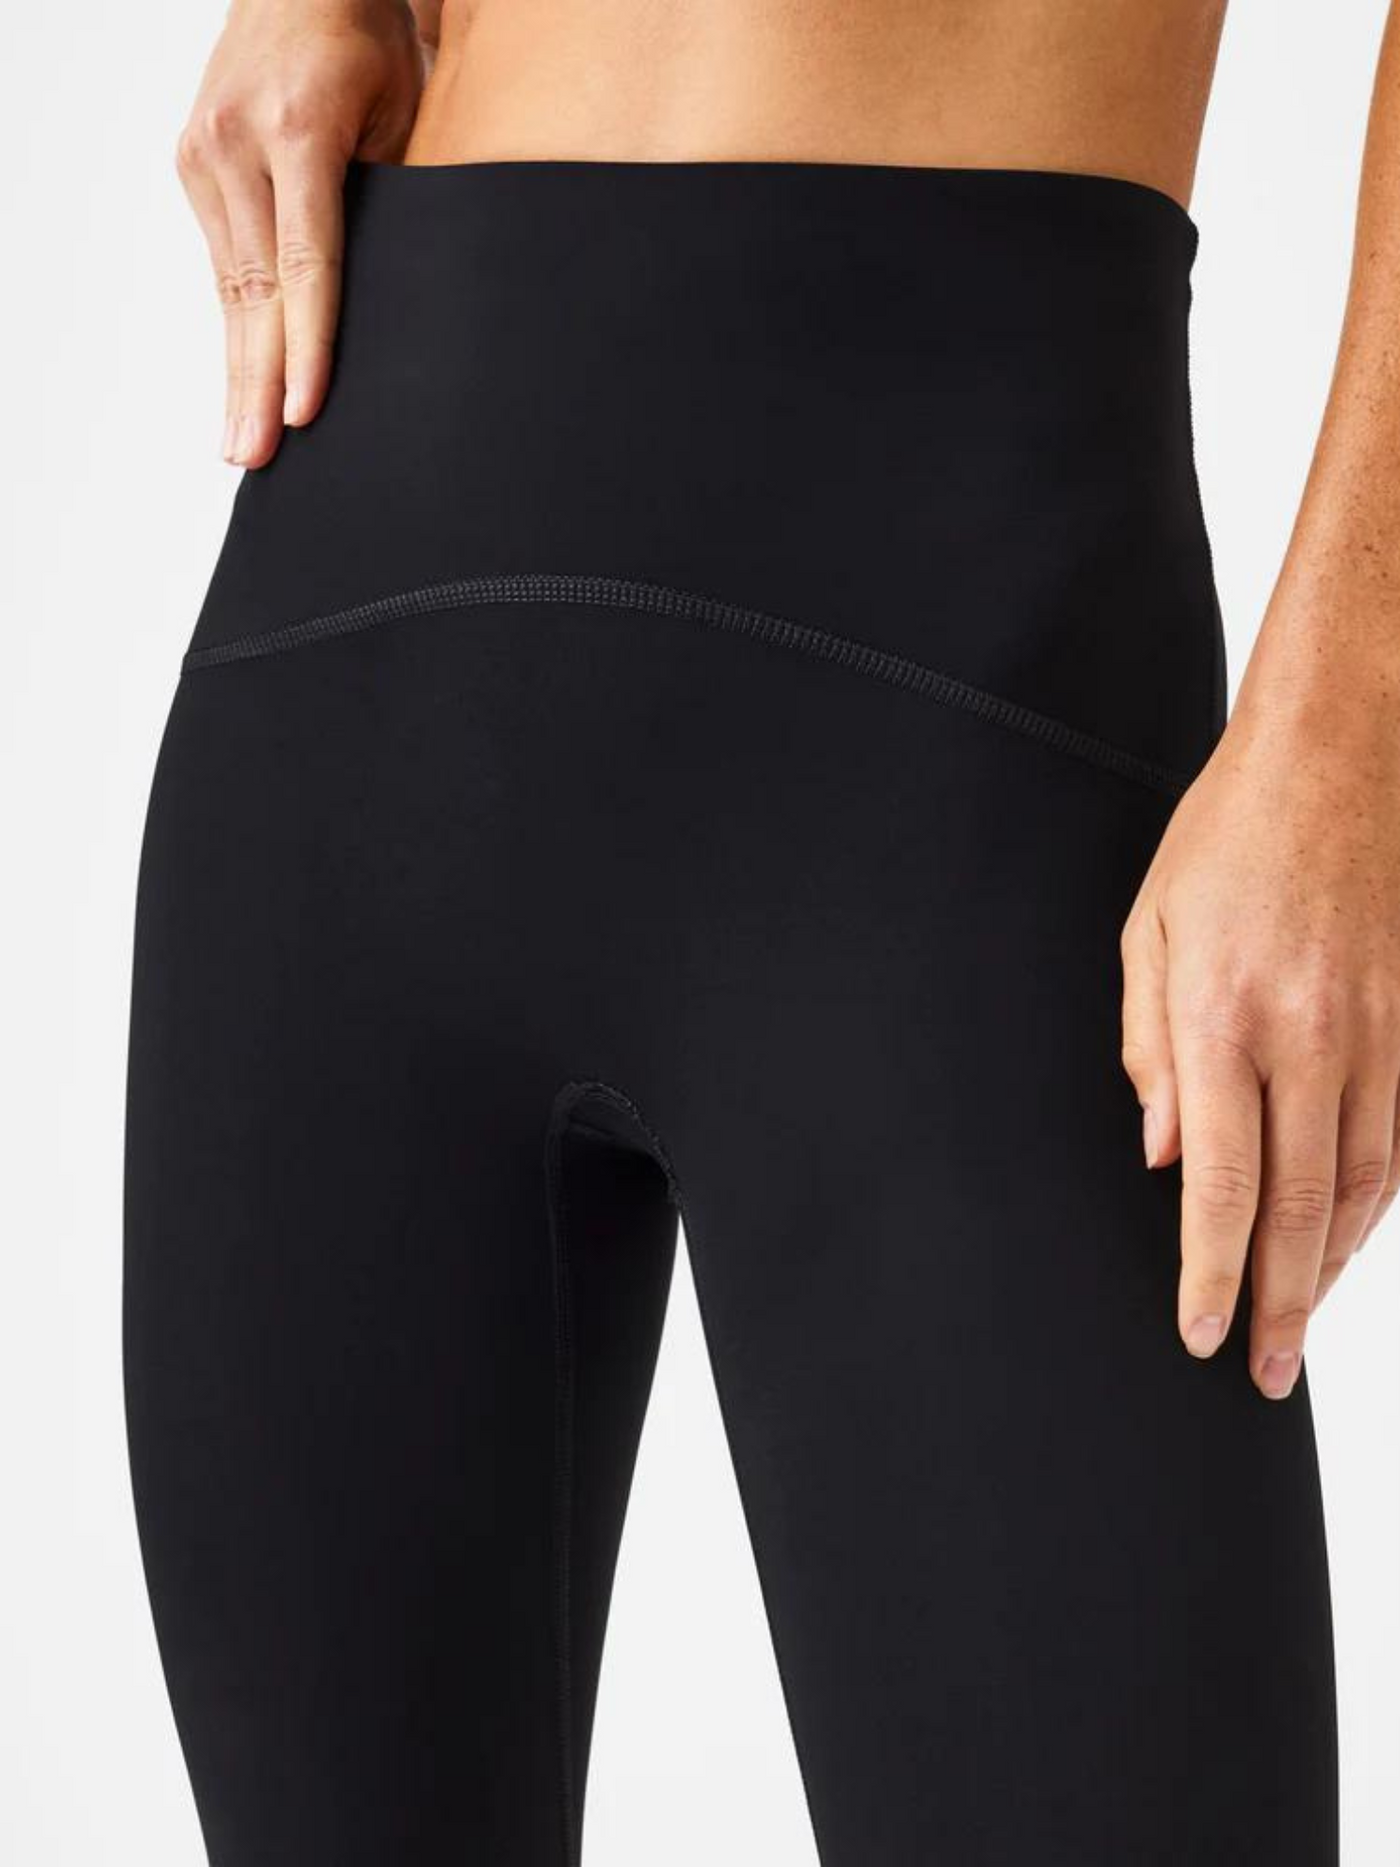 Spanx Booty Boost Leggings up close front view.